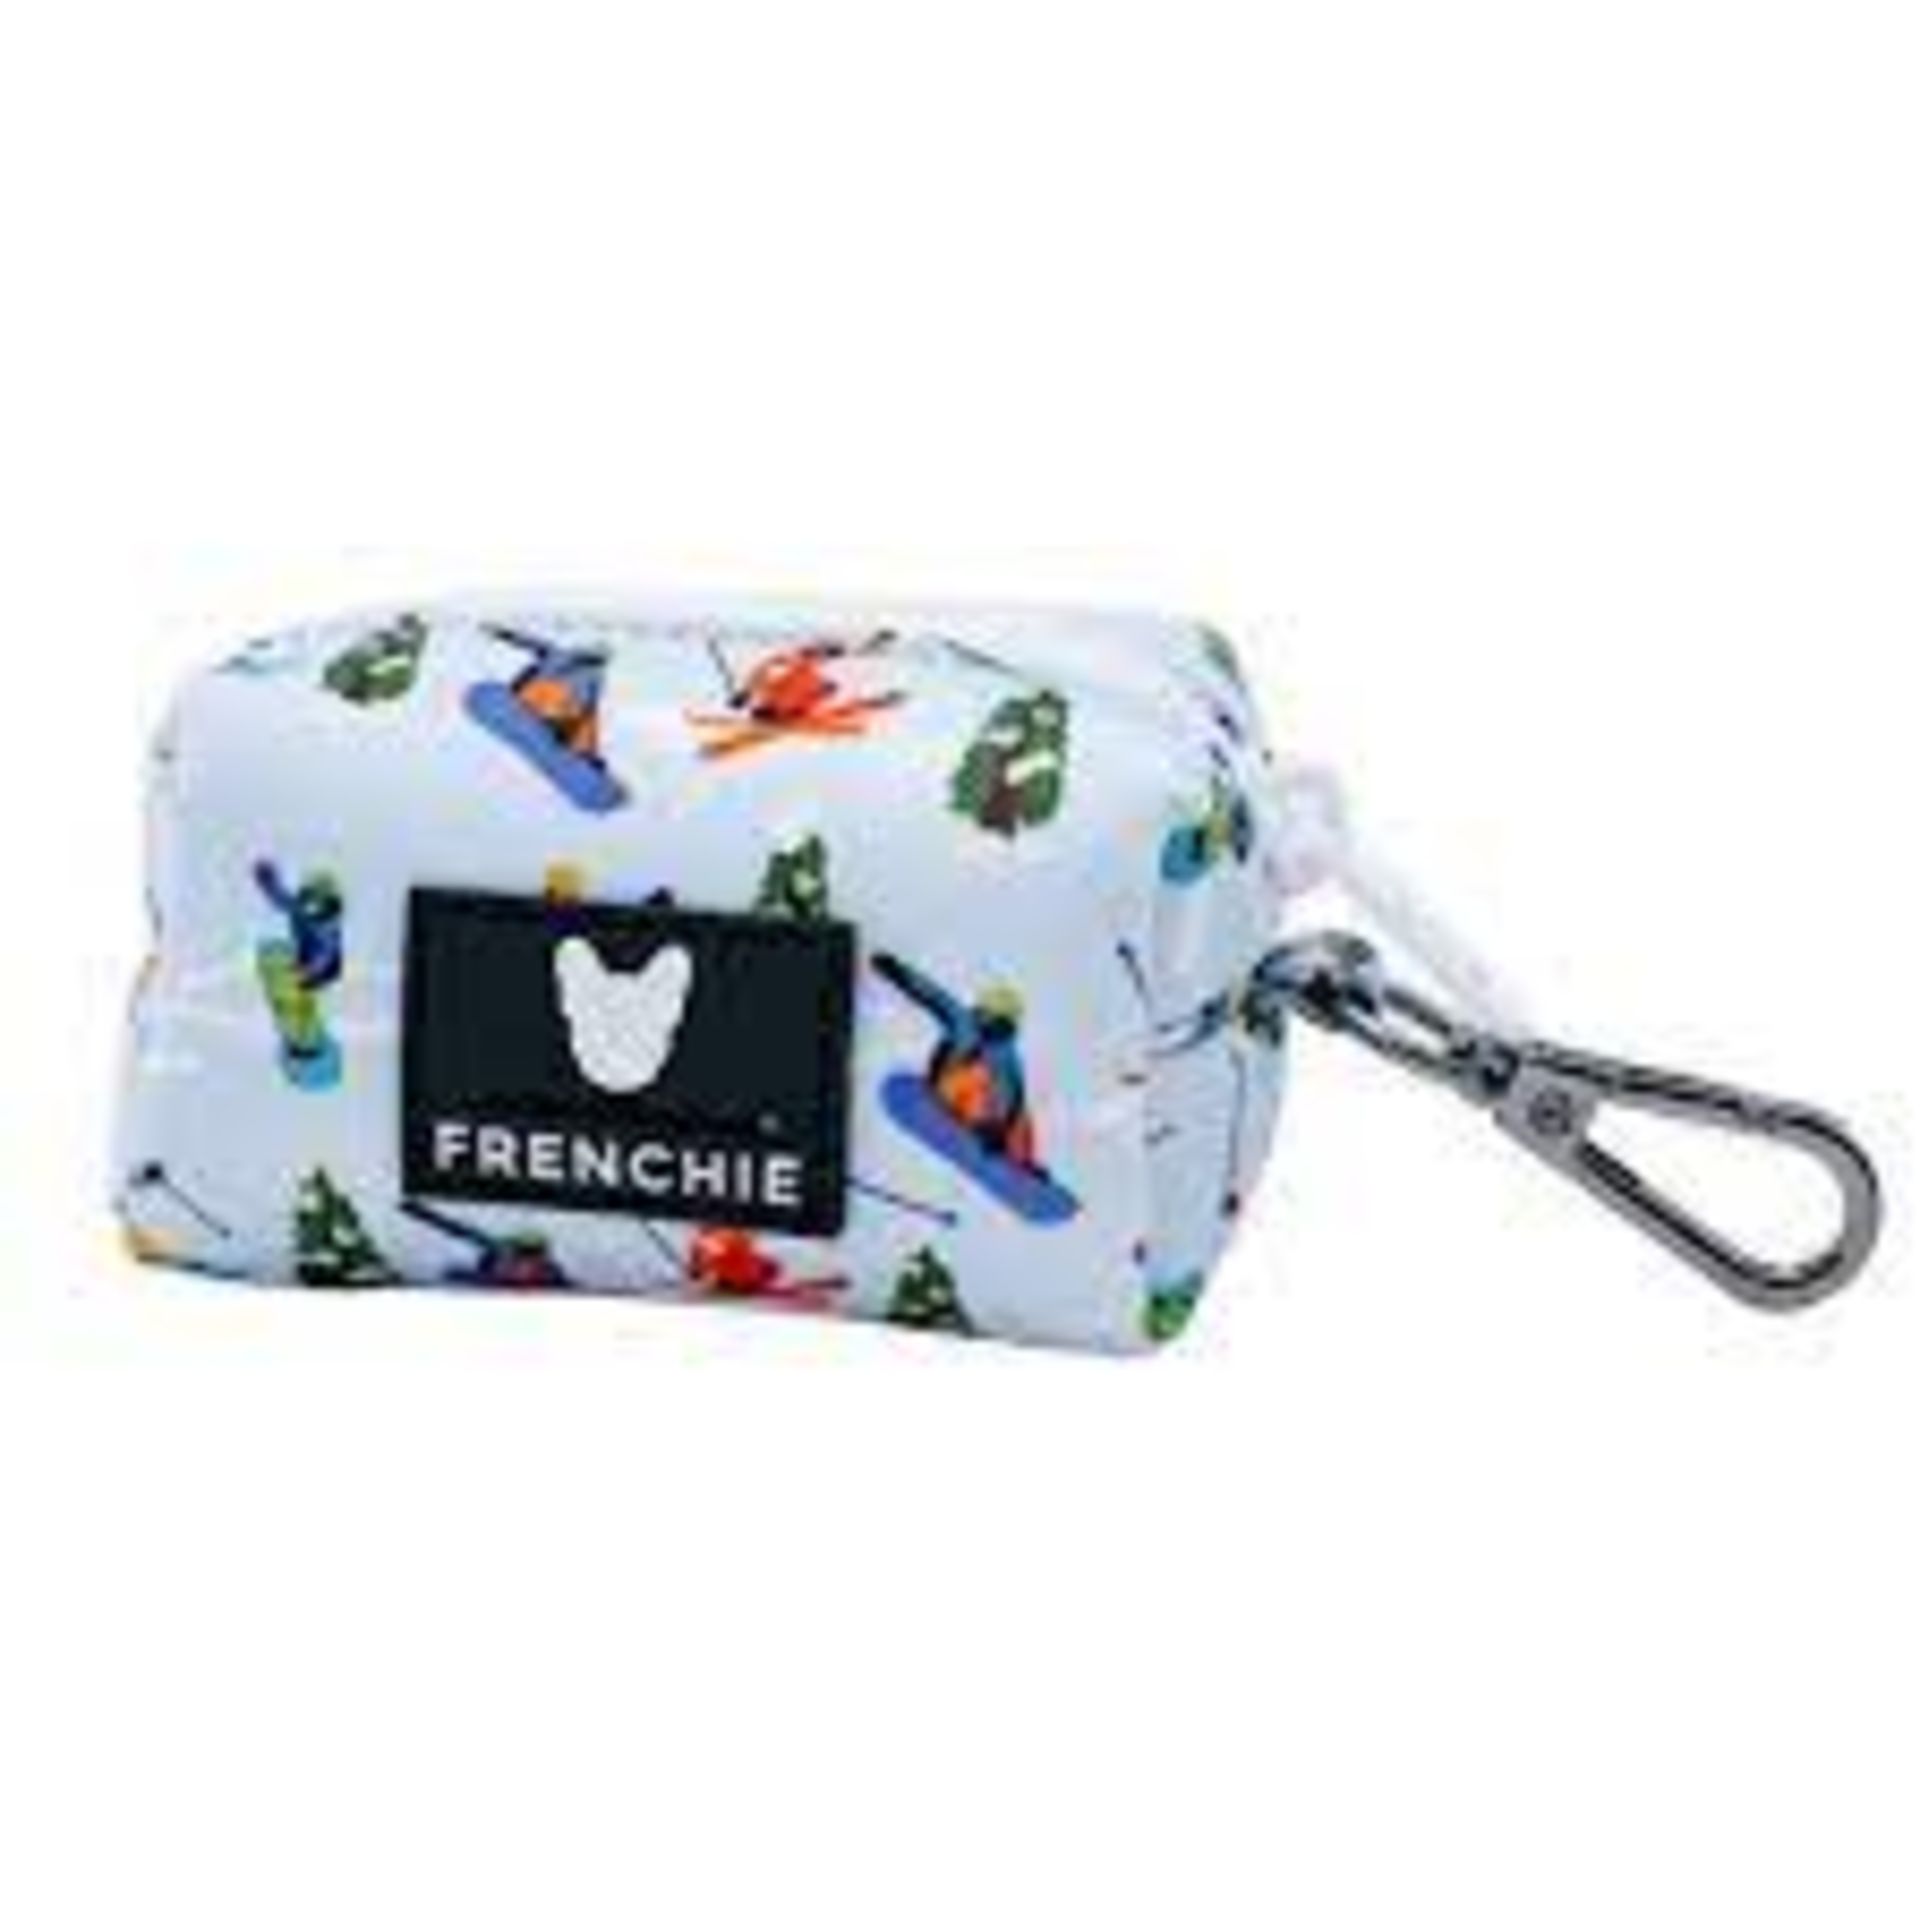 Trade Lot 100 X New .Packaged Frenchie The Bulldog Luxury Branded Dog Products. May include items - Image 23 of 50